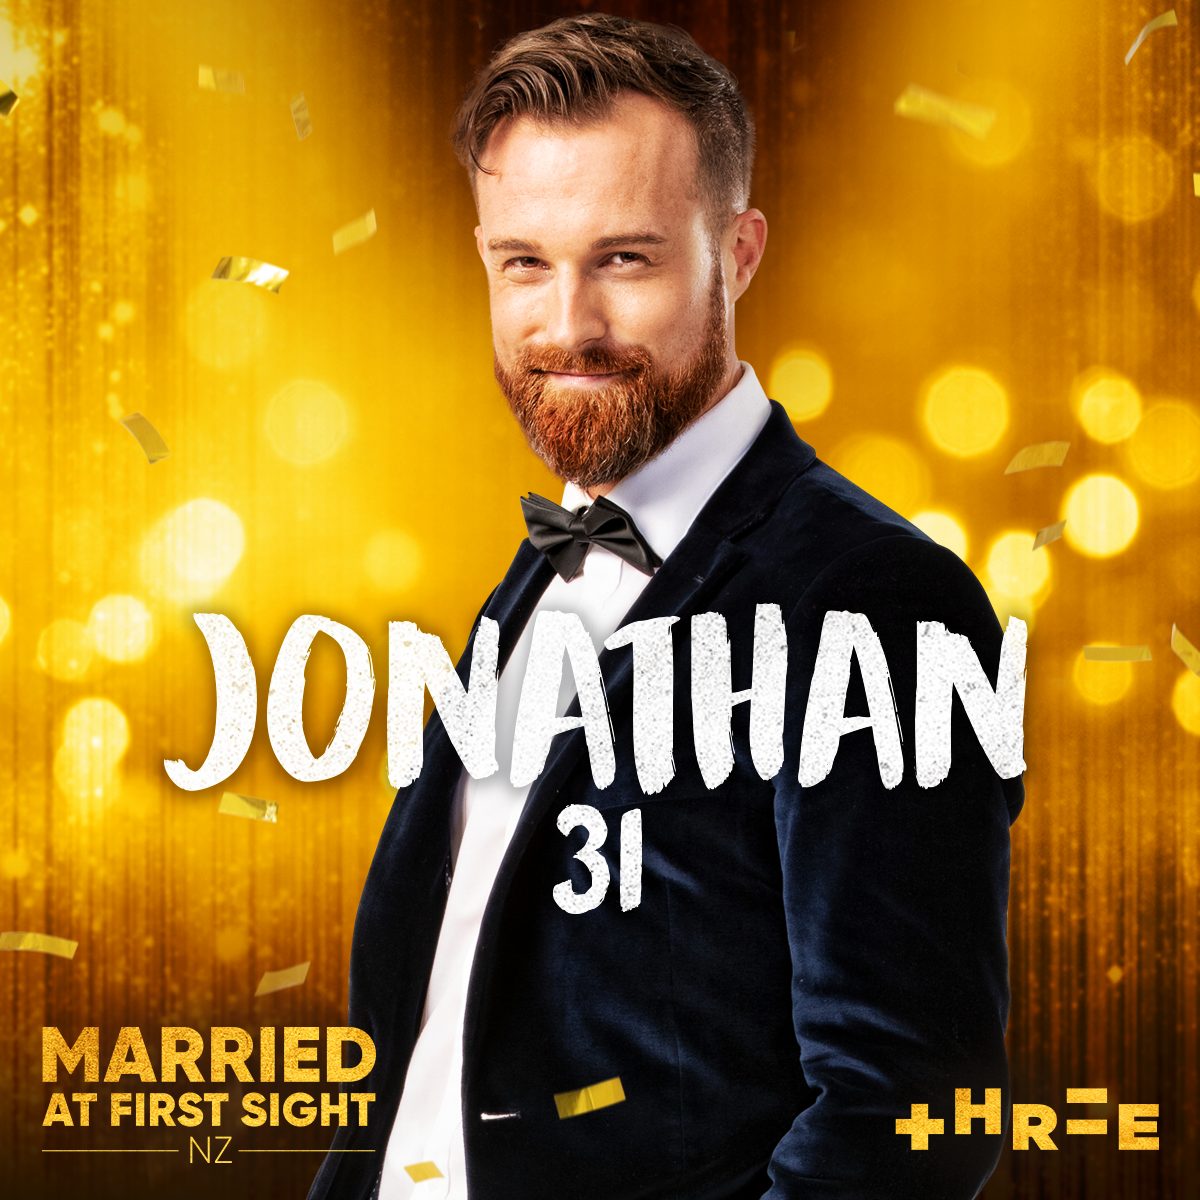 Meet the brides and grooms of Married at First Sight NZ season 3